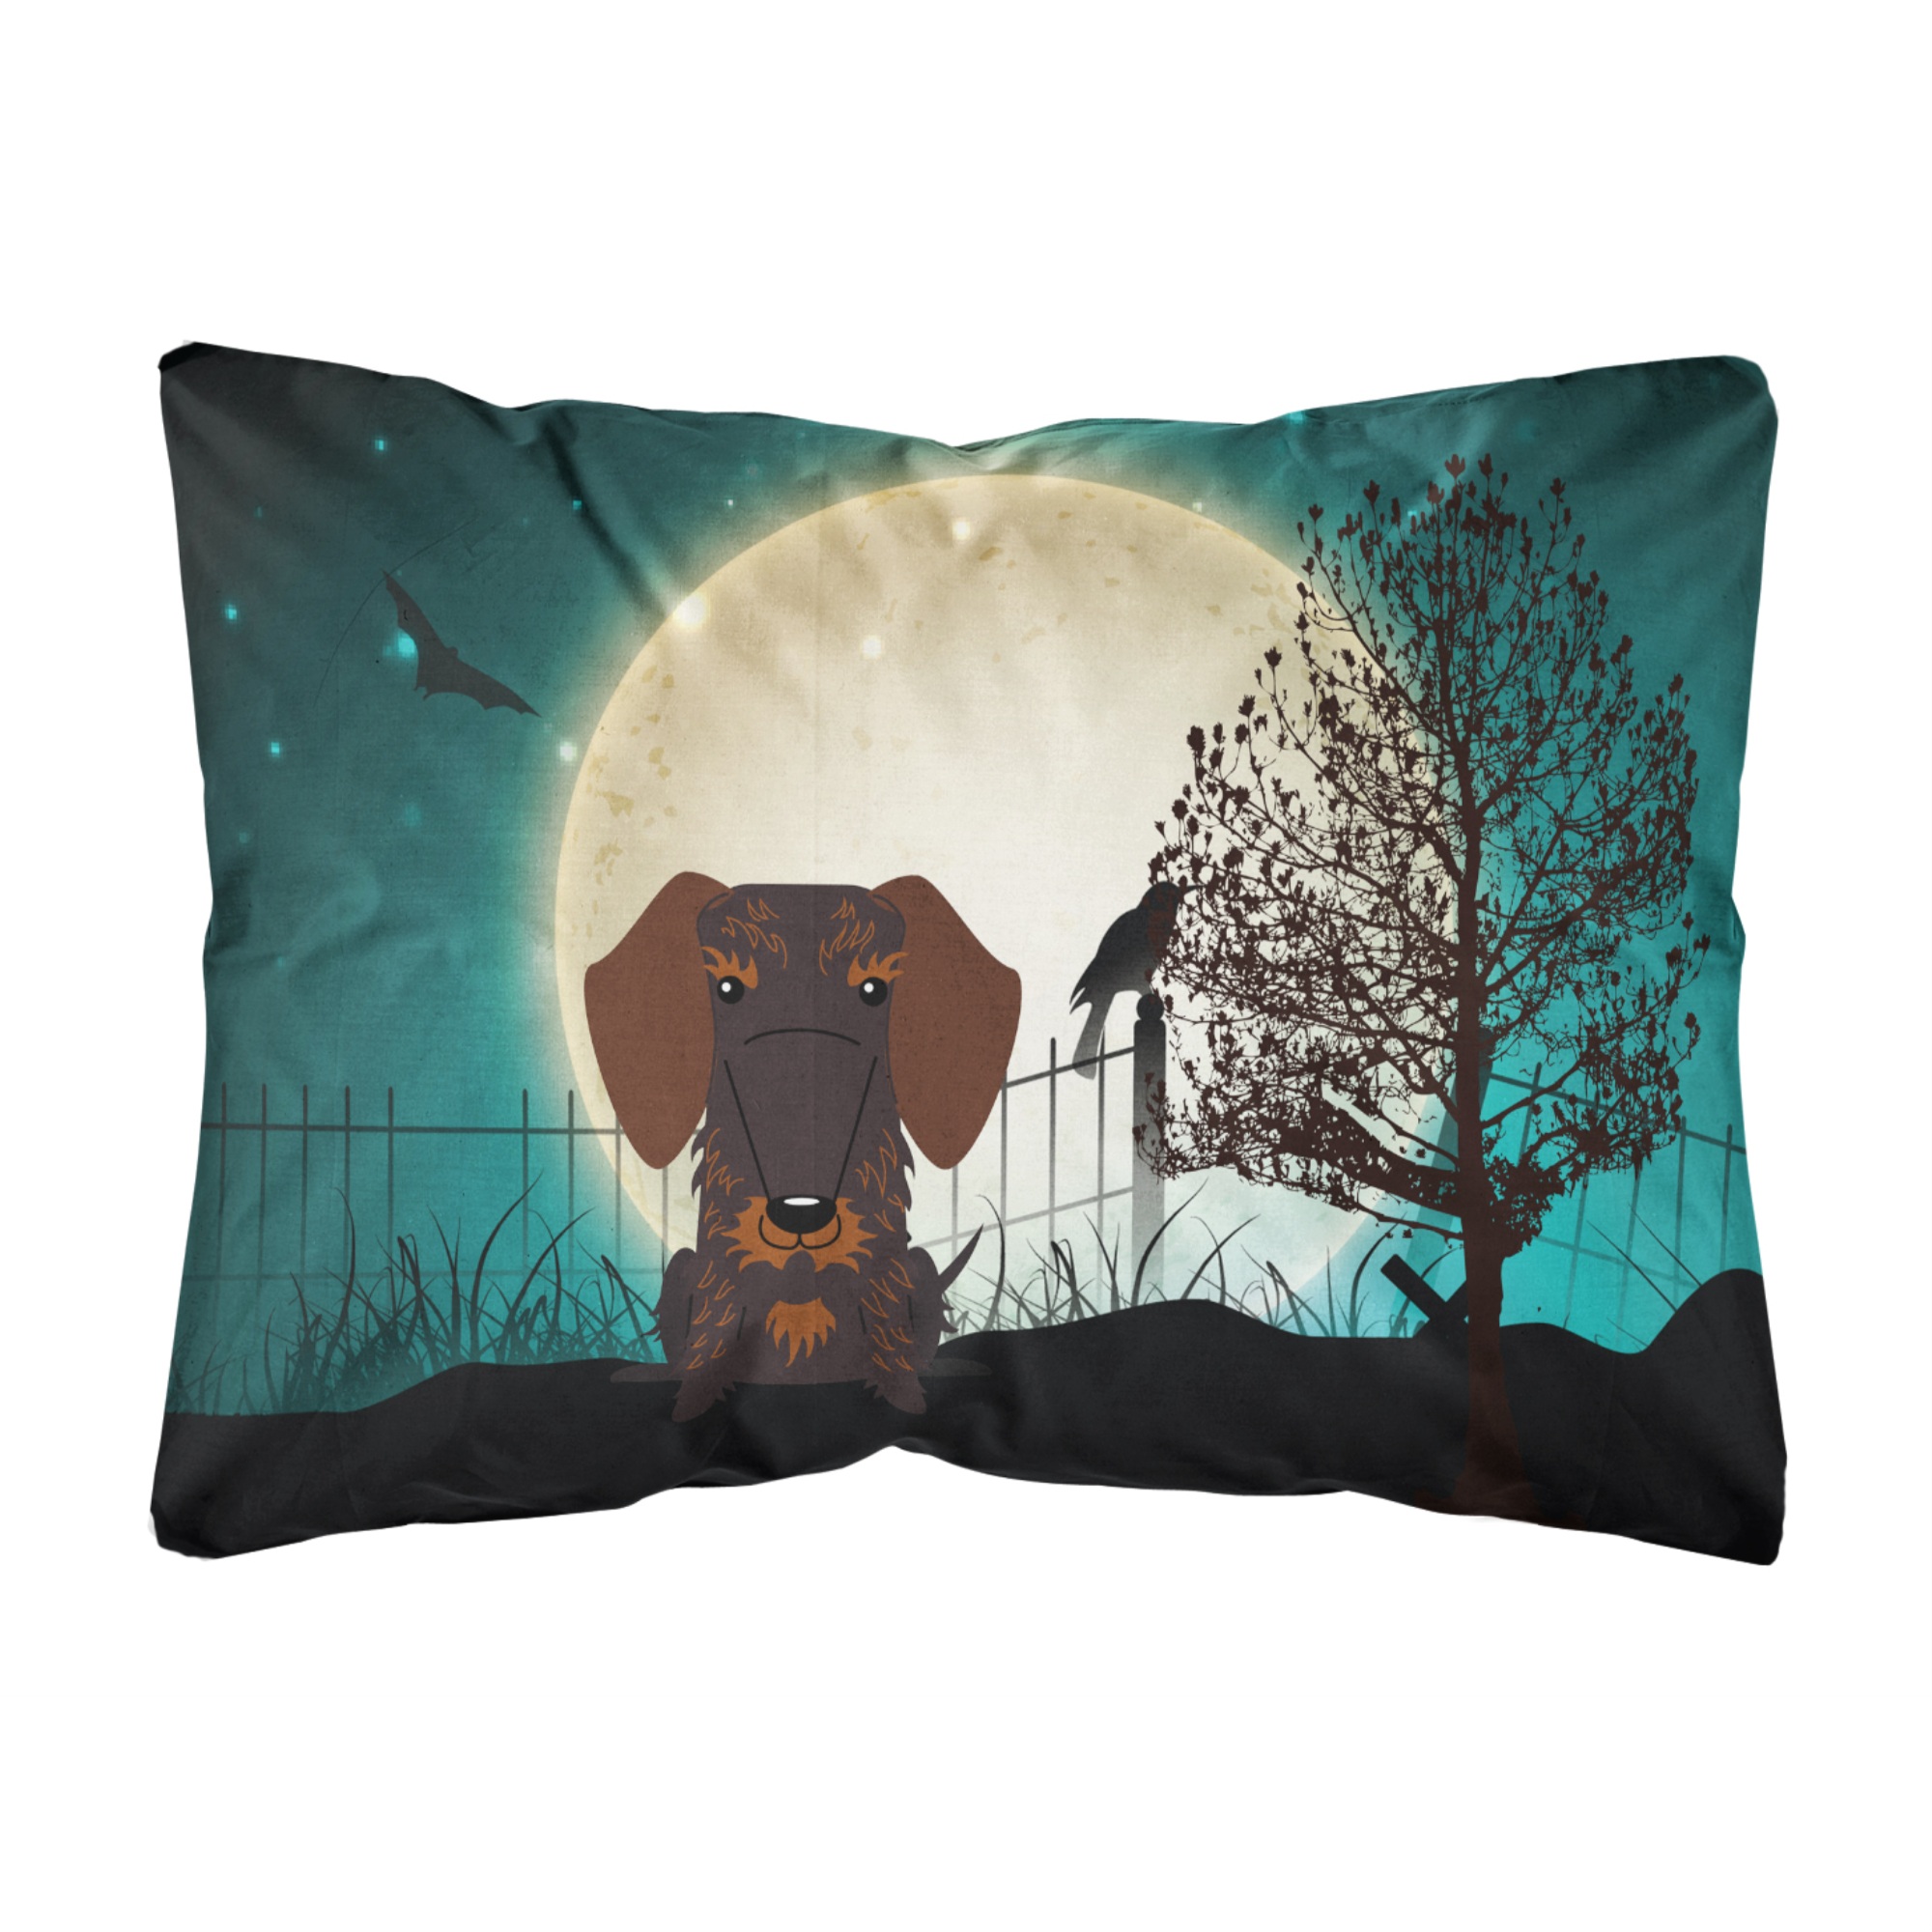 Caroline's Treasures "Caroline's Treasures BB2319PW1216 Halloween Scary Wire Haired Dachshund Chocolate Canvas Fabric Decorative Pillow, 12"" H x 16"